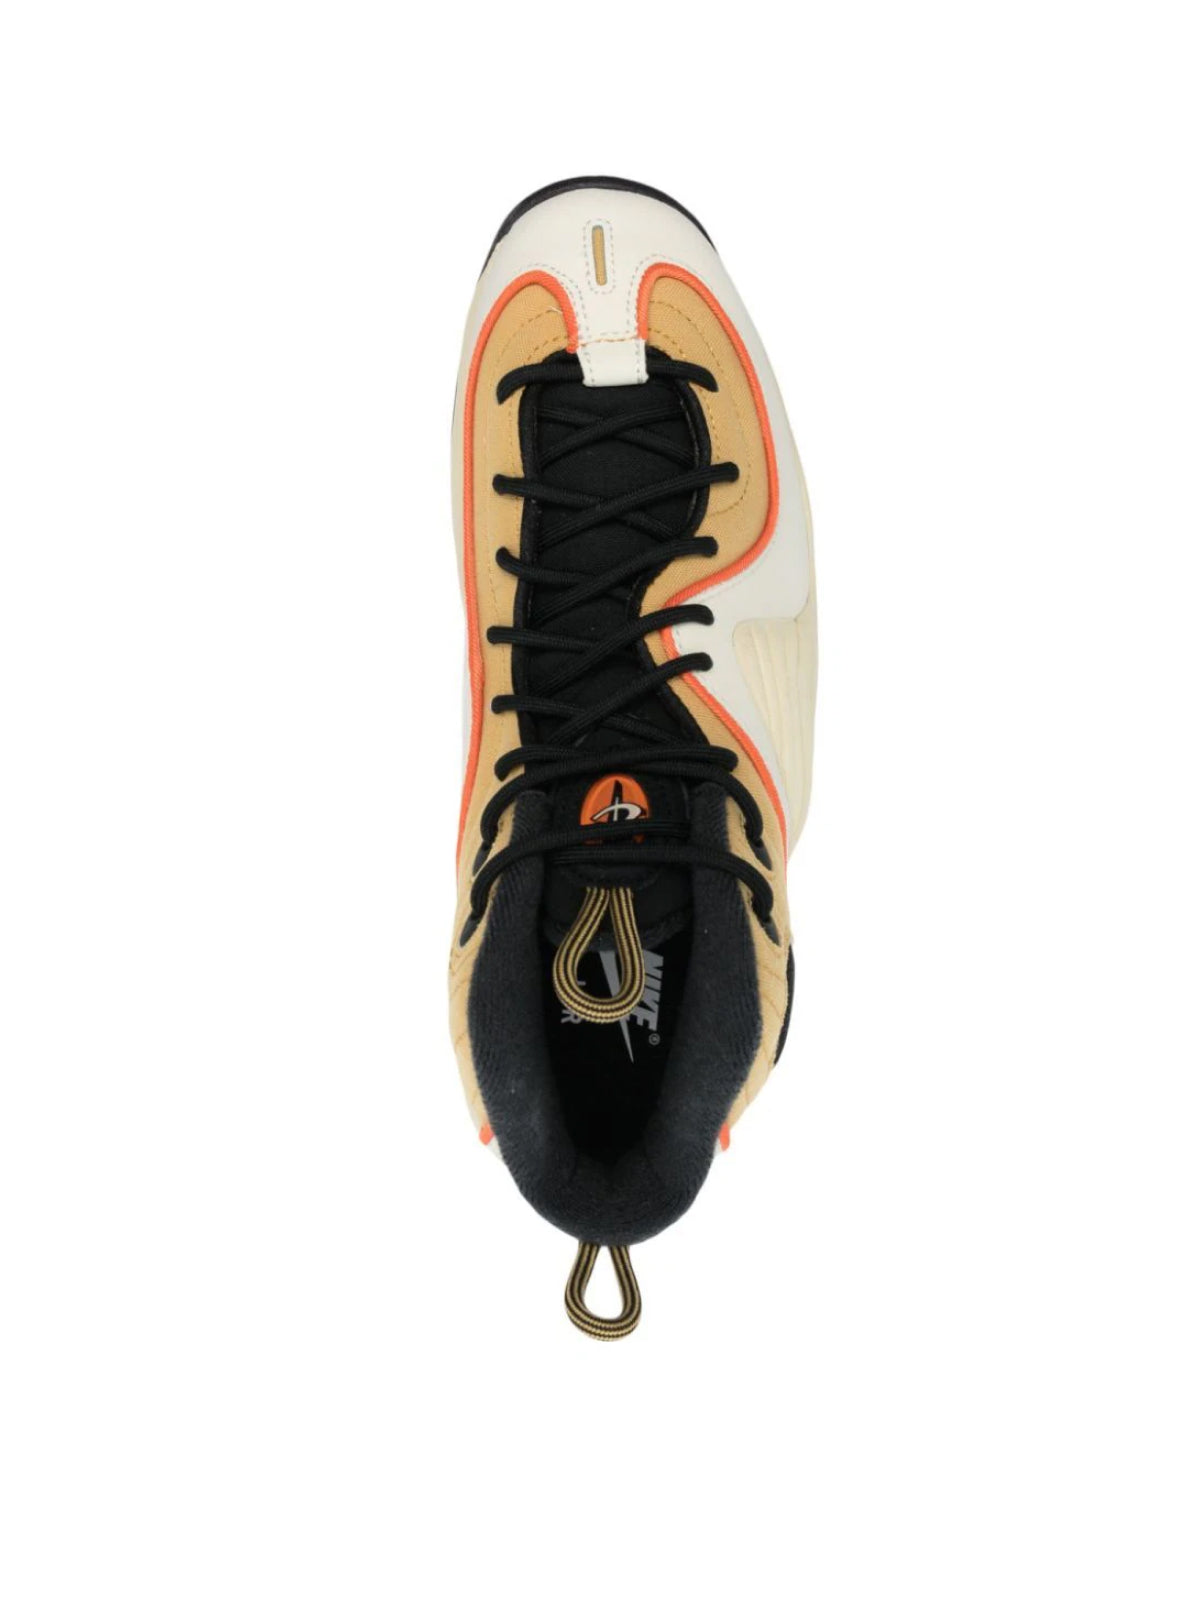 Nike-OUTLET-SALE-Air Max Penny Sneakers-ARCHIVIST